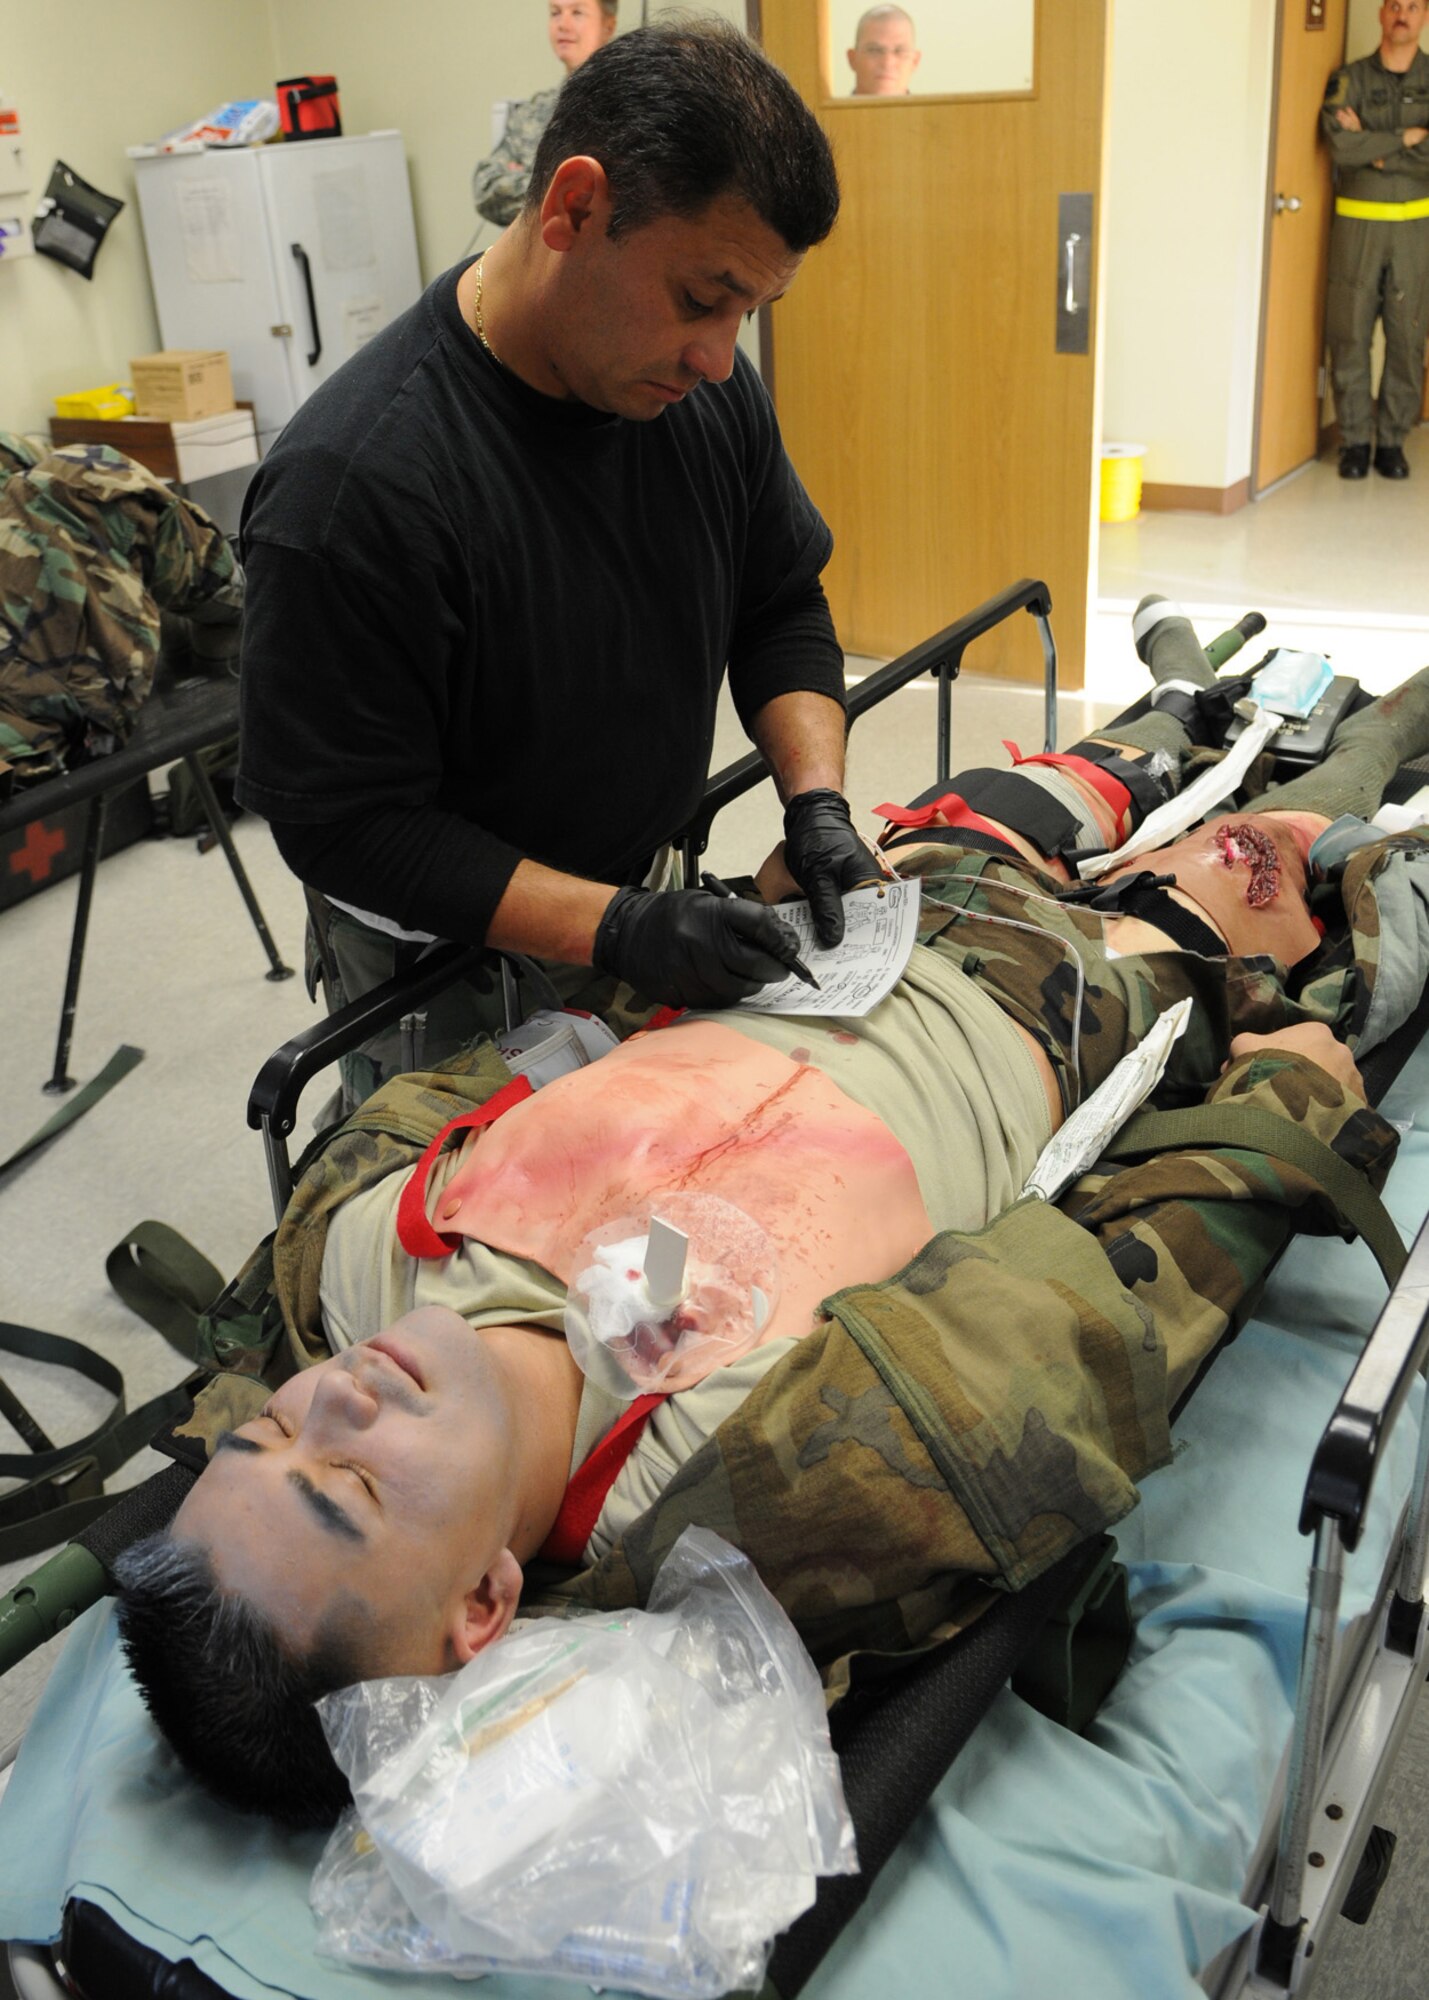 DAEGU AIR BASE, Republic of Korea -- Tech. Sgt. Sixto Vargas, from the 353rd Operations Support Squadron Medical Flight, fills out a patient transfer card during medical training exercise here March 18. The training is in preparation for the group's annual operational readiness exercise which affords unit members an opportunity to practice wartime skills necessary for their ability to survive and operate. The 353rd Special Operations Group is the focal point for all U.S. Air Force special operations activities throughout the U.S. Pacific Command theater. (U.S. Air Force photo by Tech. Sgt. Aaron Cram)